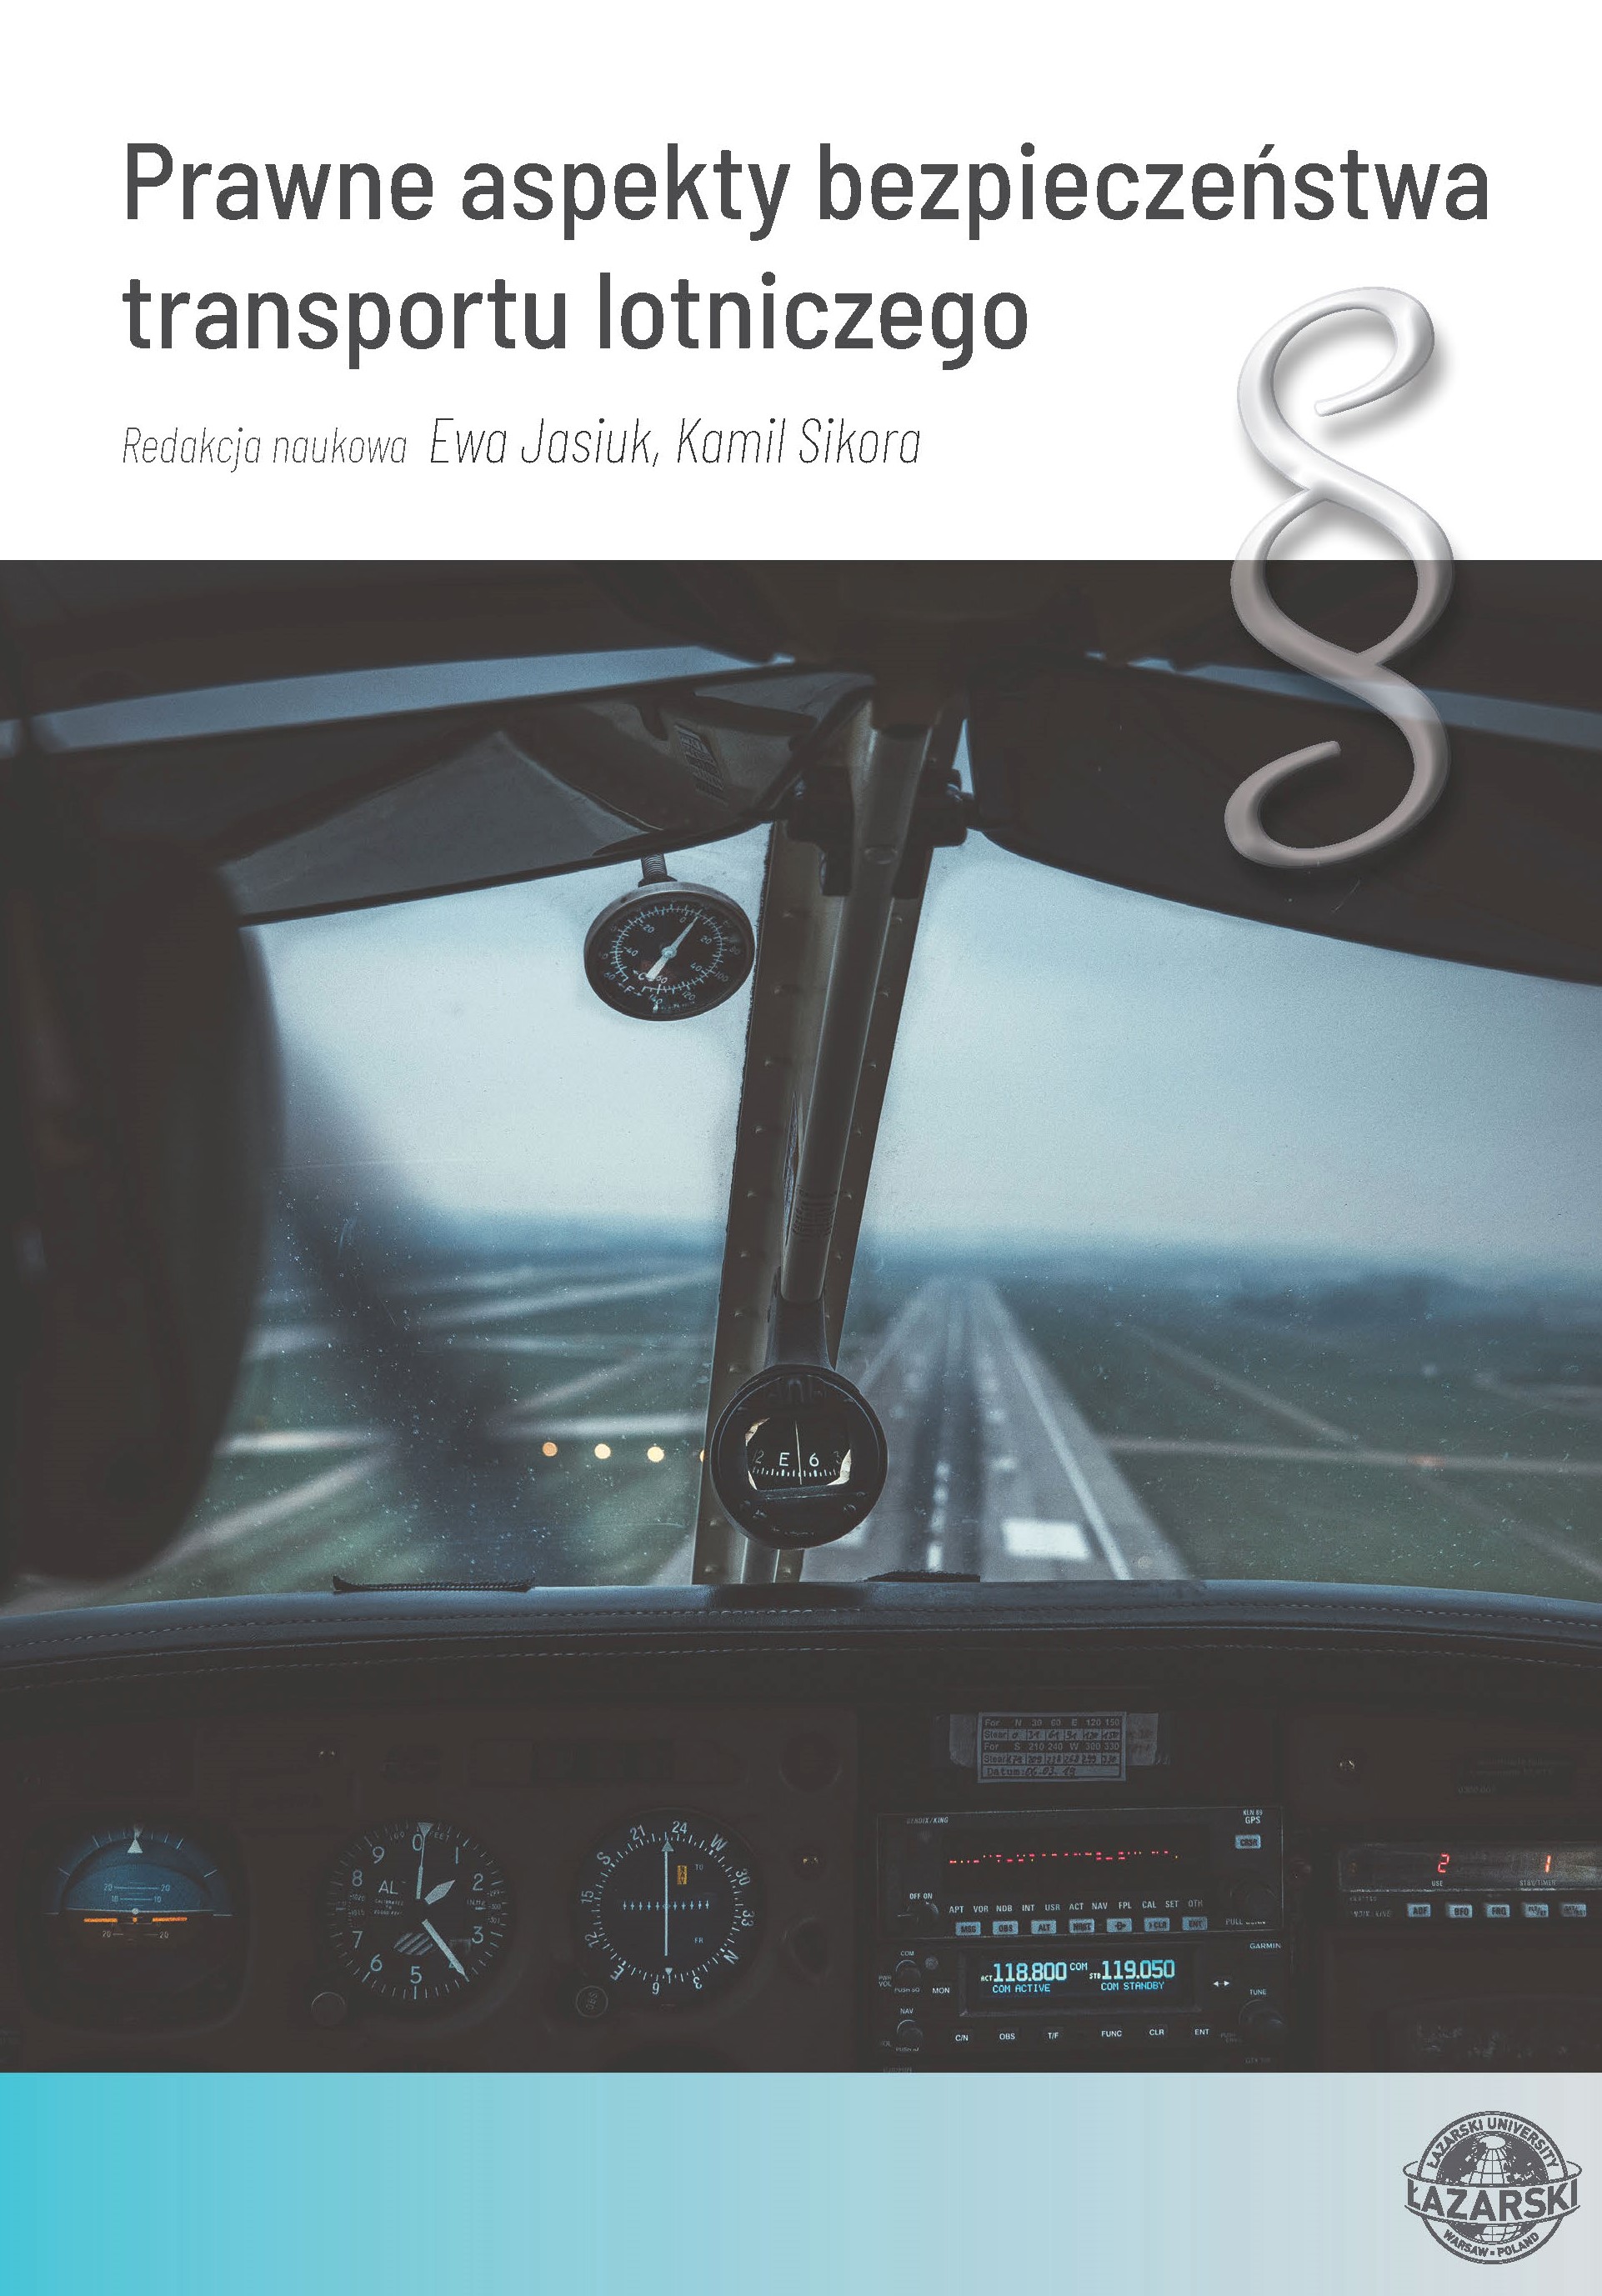 Public administration departments responsible for air transport safety in the Republic of Poland Cover Image